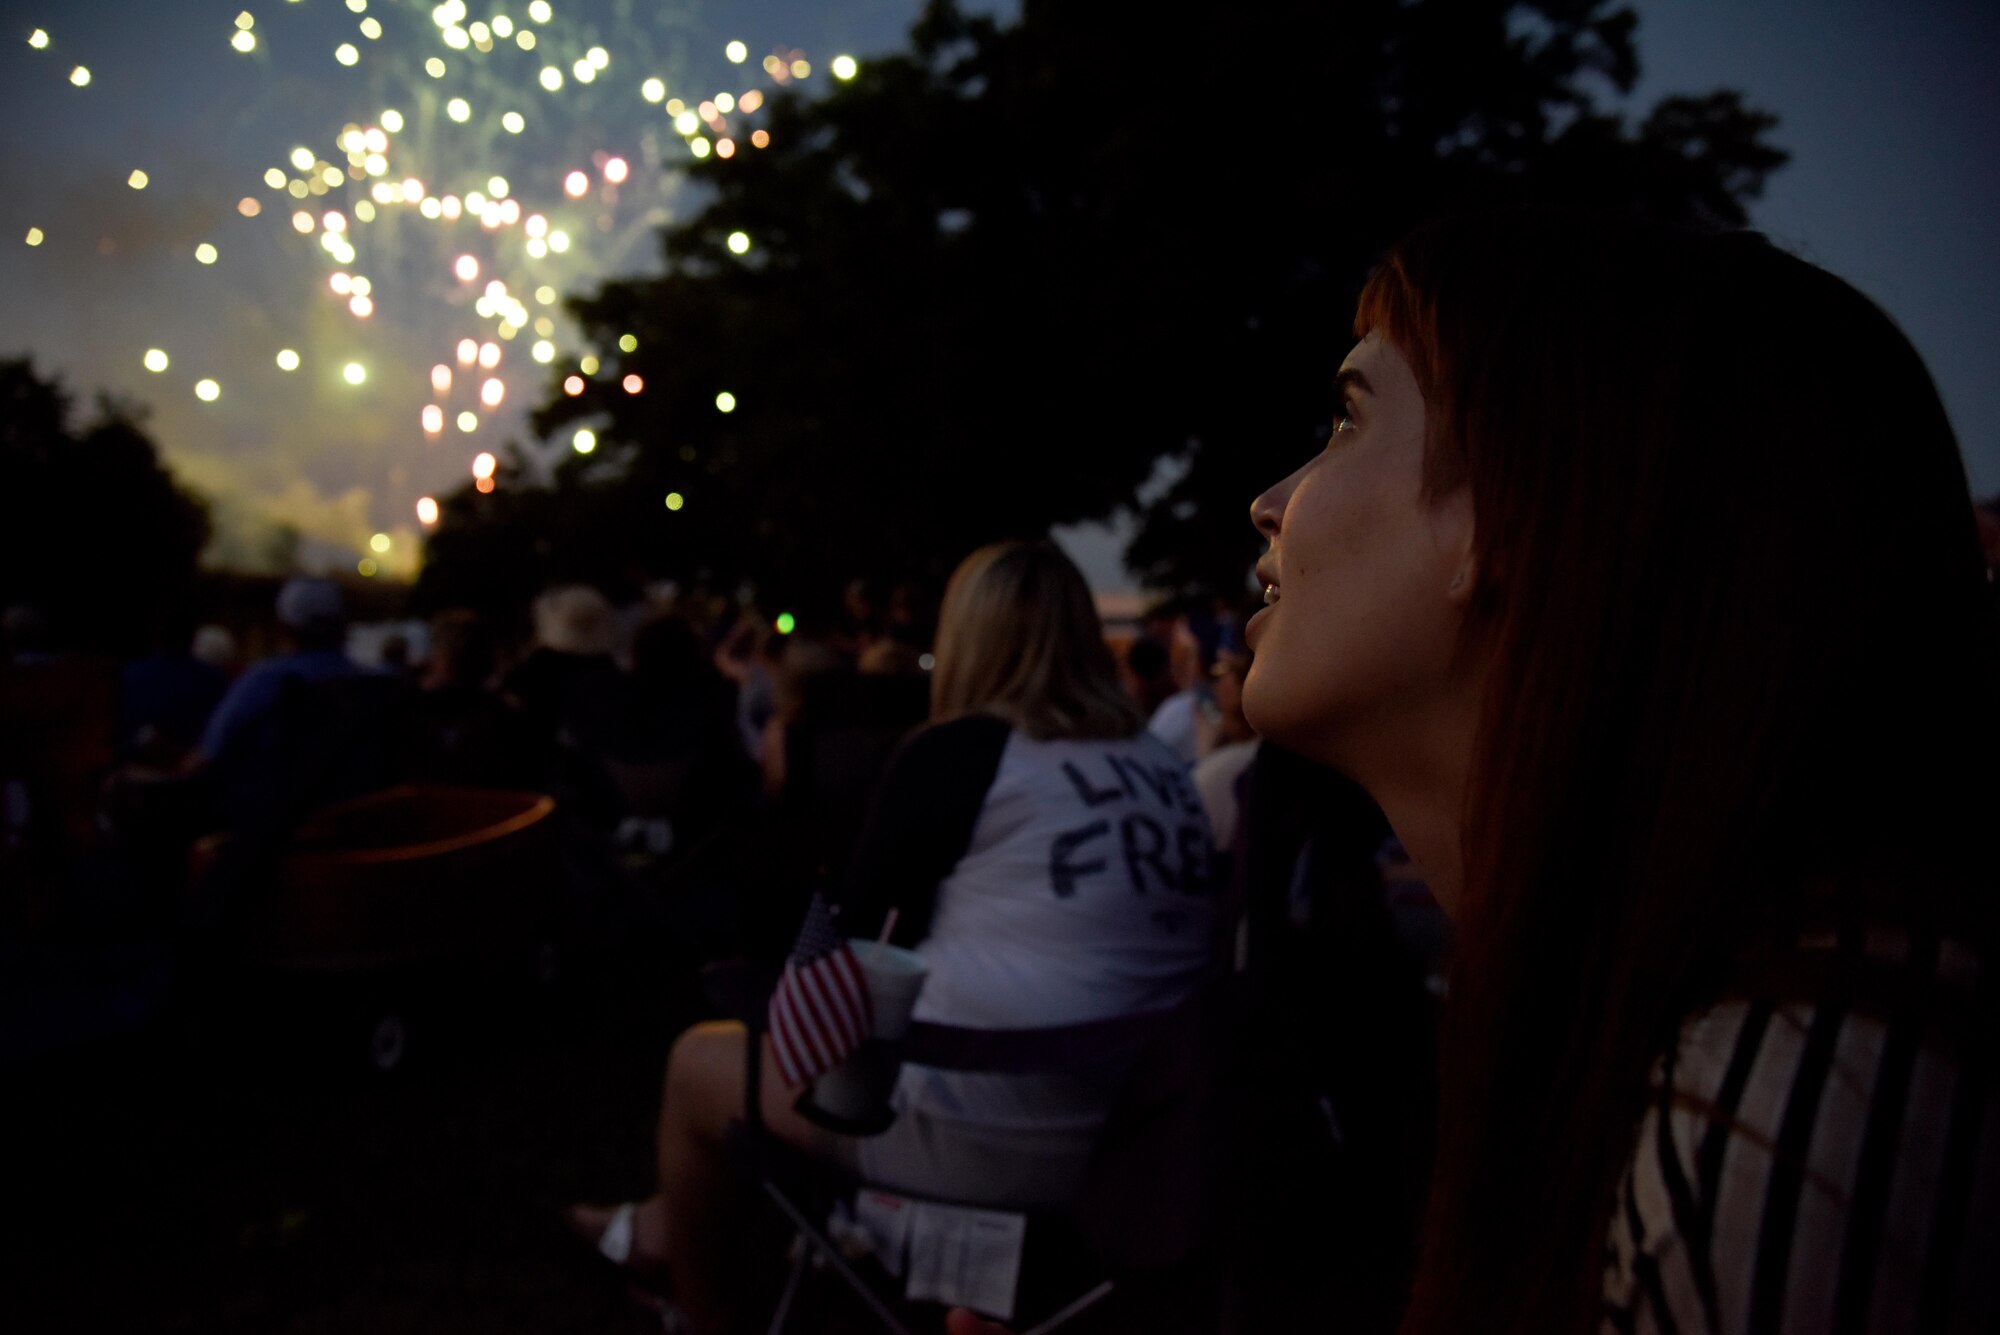 Natalie Ray, 29th Annual San Angelo Symphony’s July 3rd Pops Concert attendee, views fireworks at the Pops Concert at the Bill Aylor Sr. Memorial RiverStage in San Angelo, Texas, July 3, 2016. This is Ray’s first time viewing the Pops Concert and she said enjoyed the concert and was surprised how supportive the community is to its service members. (U.S. Air Force photo by Senior Airman Joshua Edwards/Released)